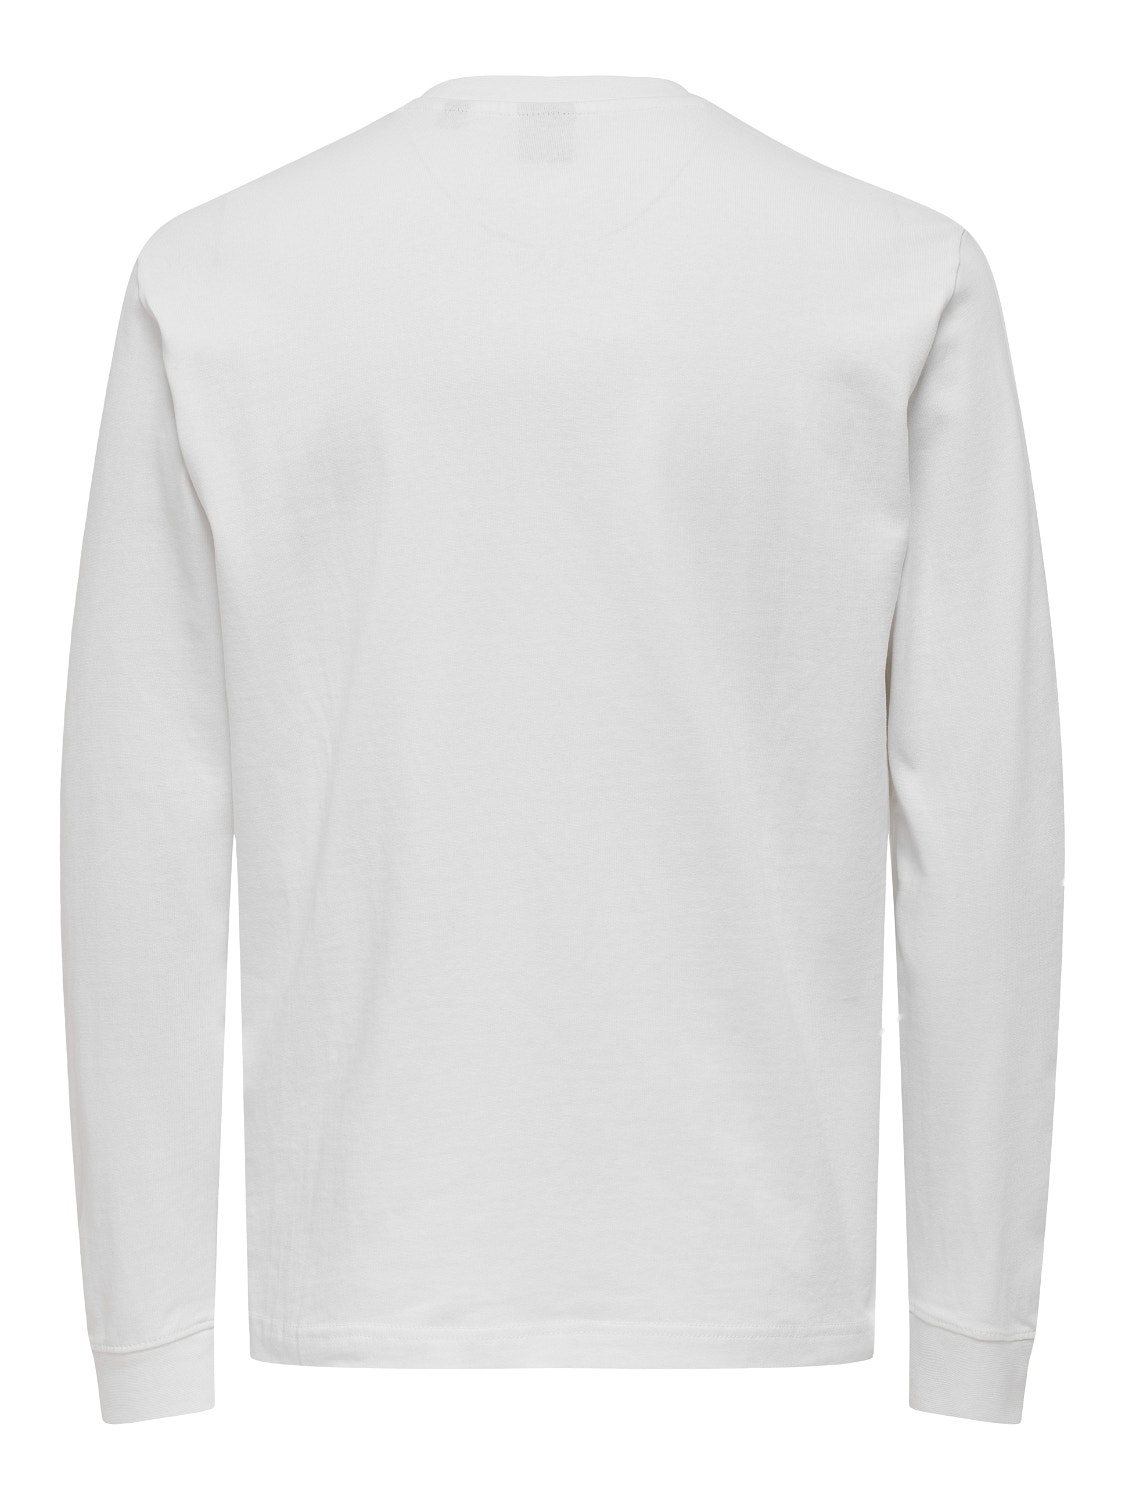 ONLY & SONS Regular Fit O-Neck T-Shirt -Bright White - 22021335